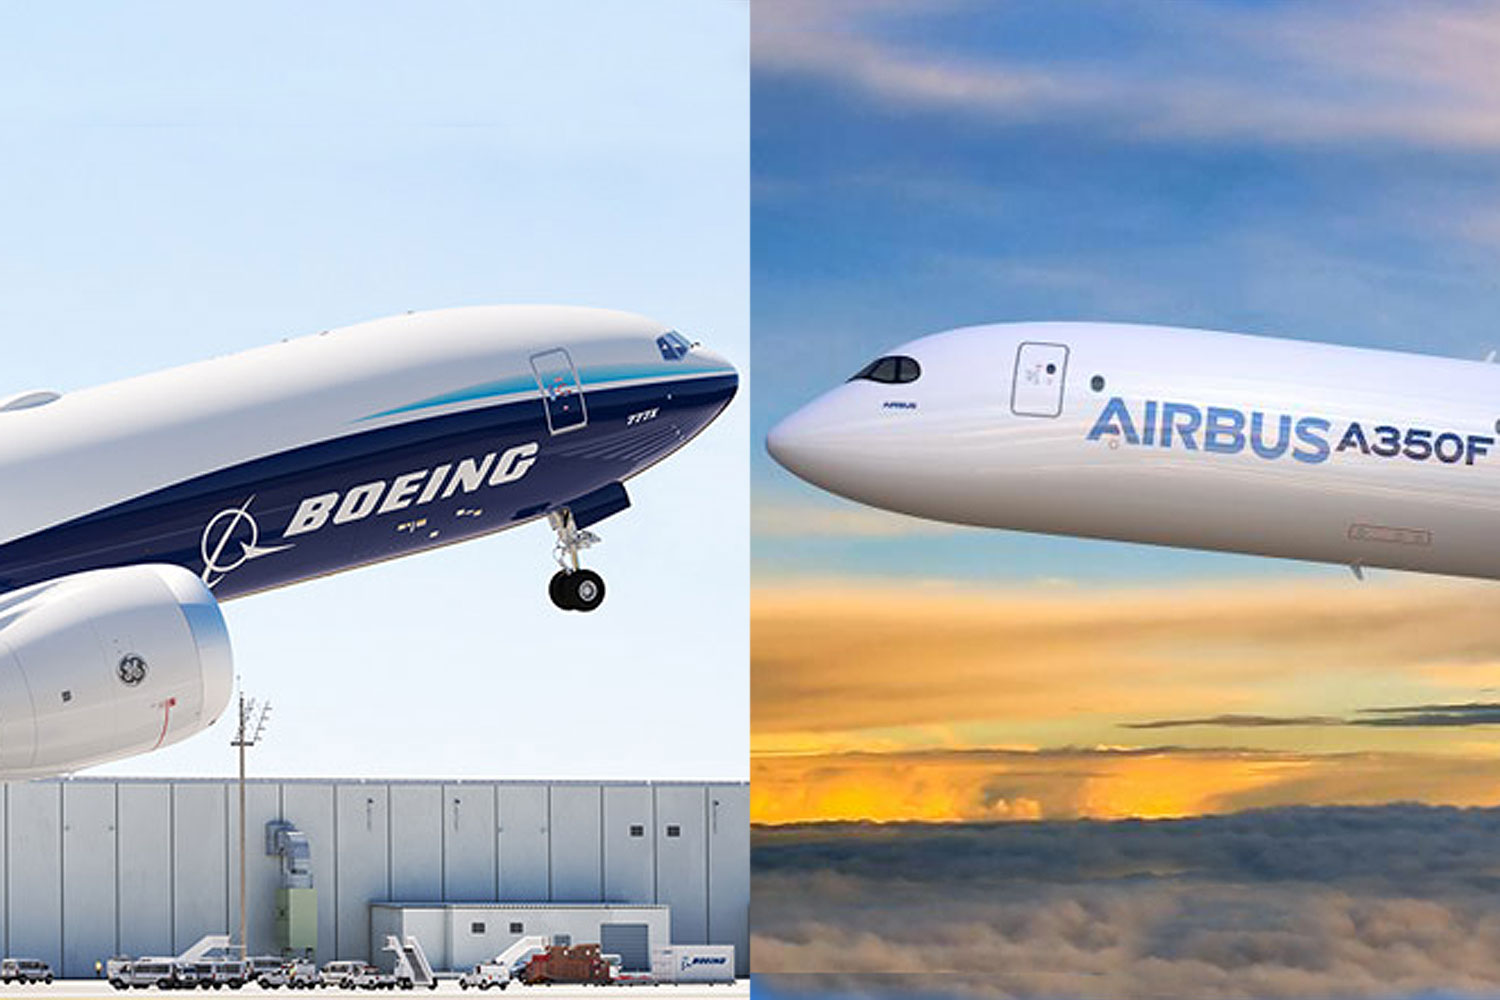 Boeing increases the fuselage length on the 777-8 passenger jet